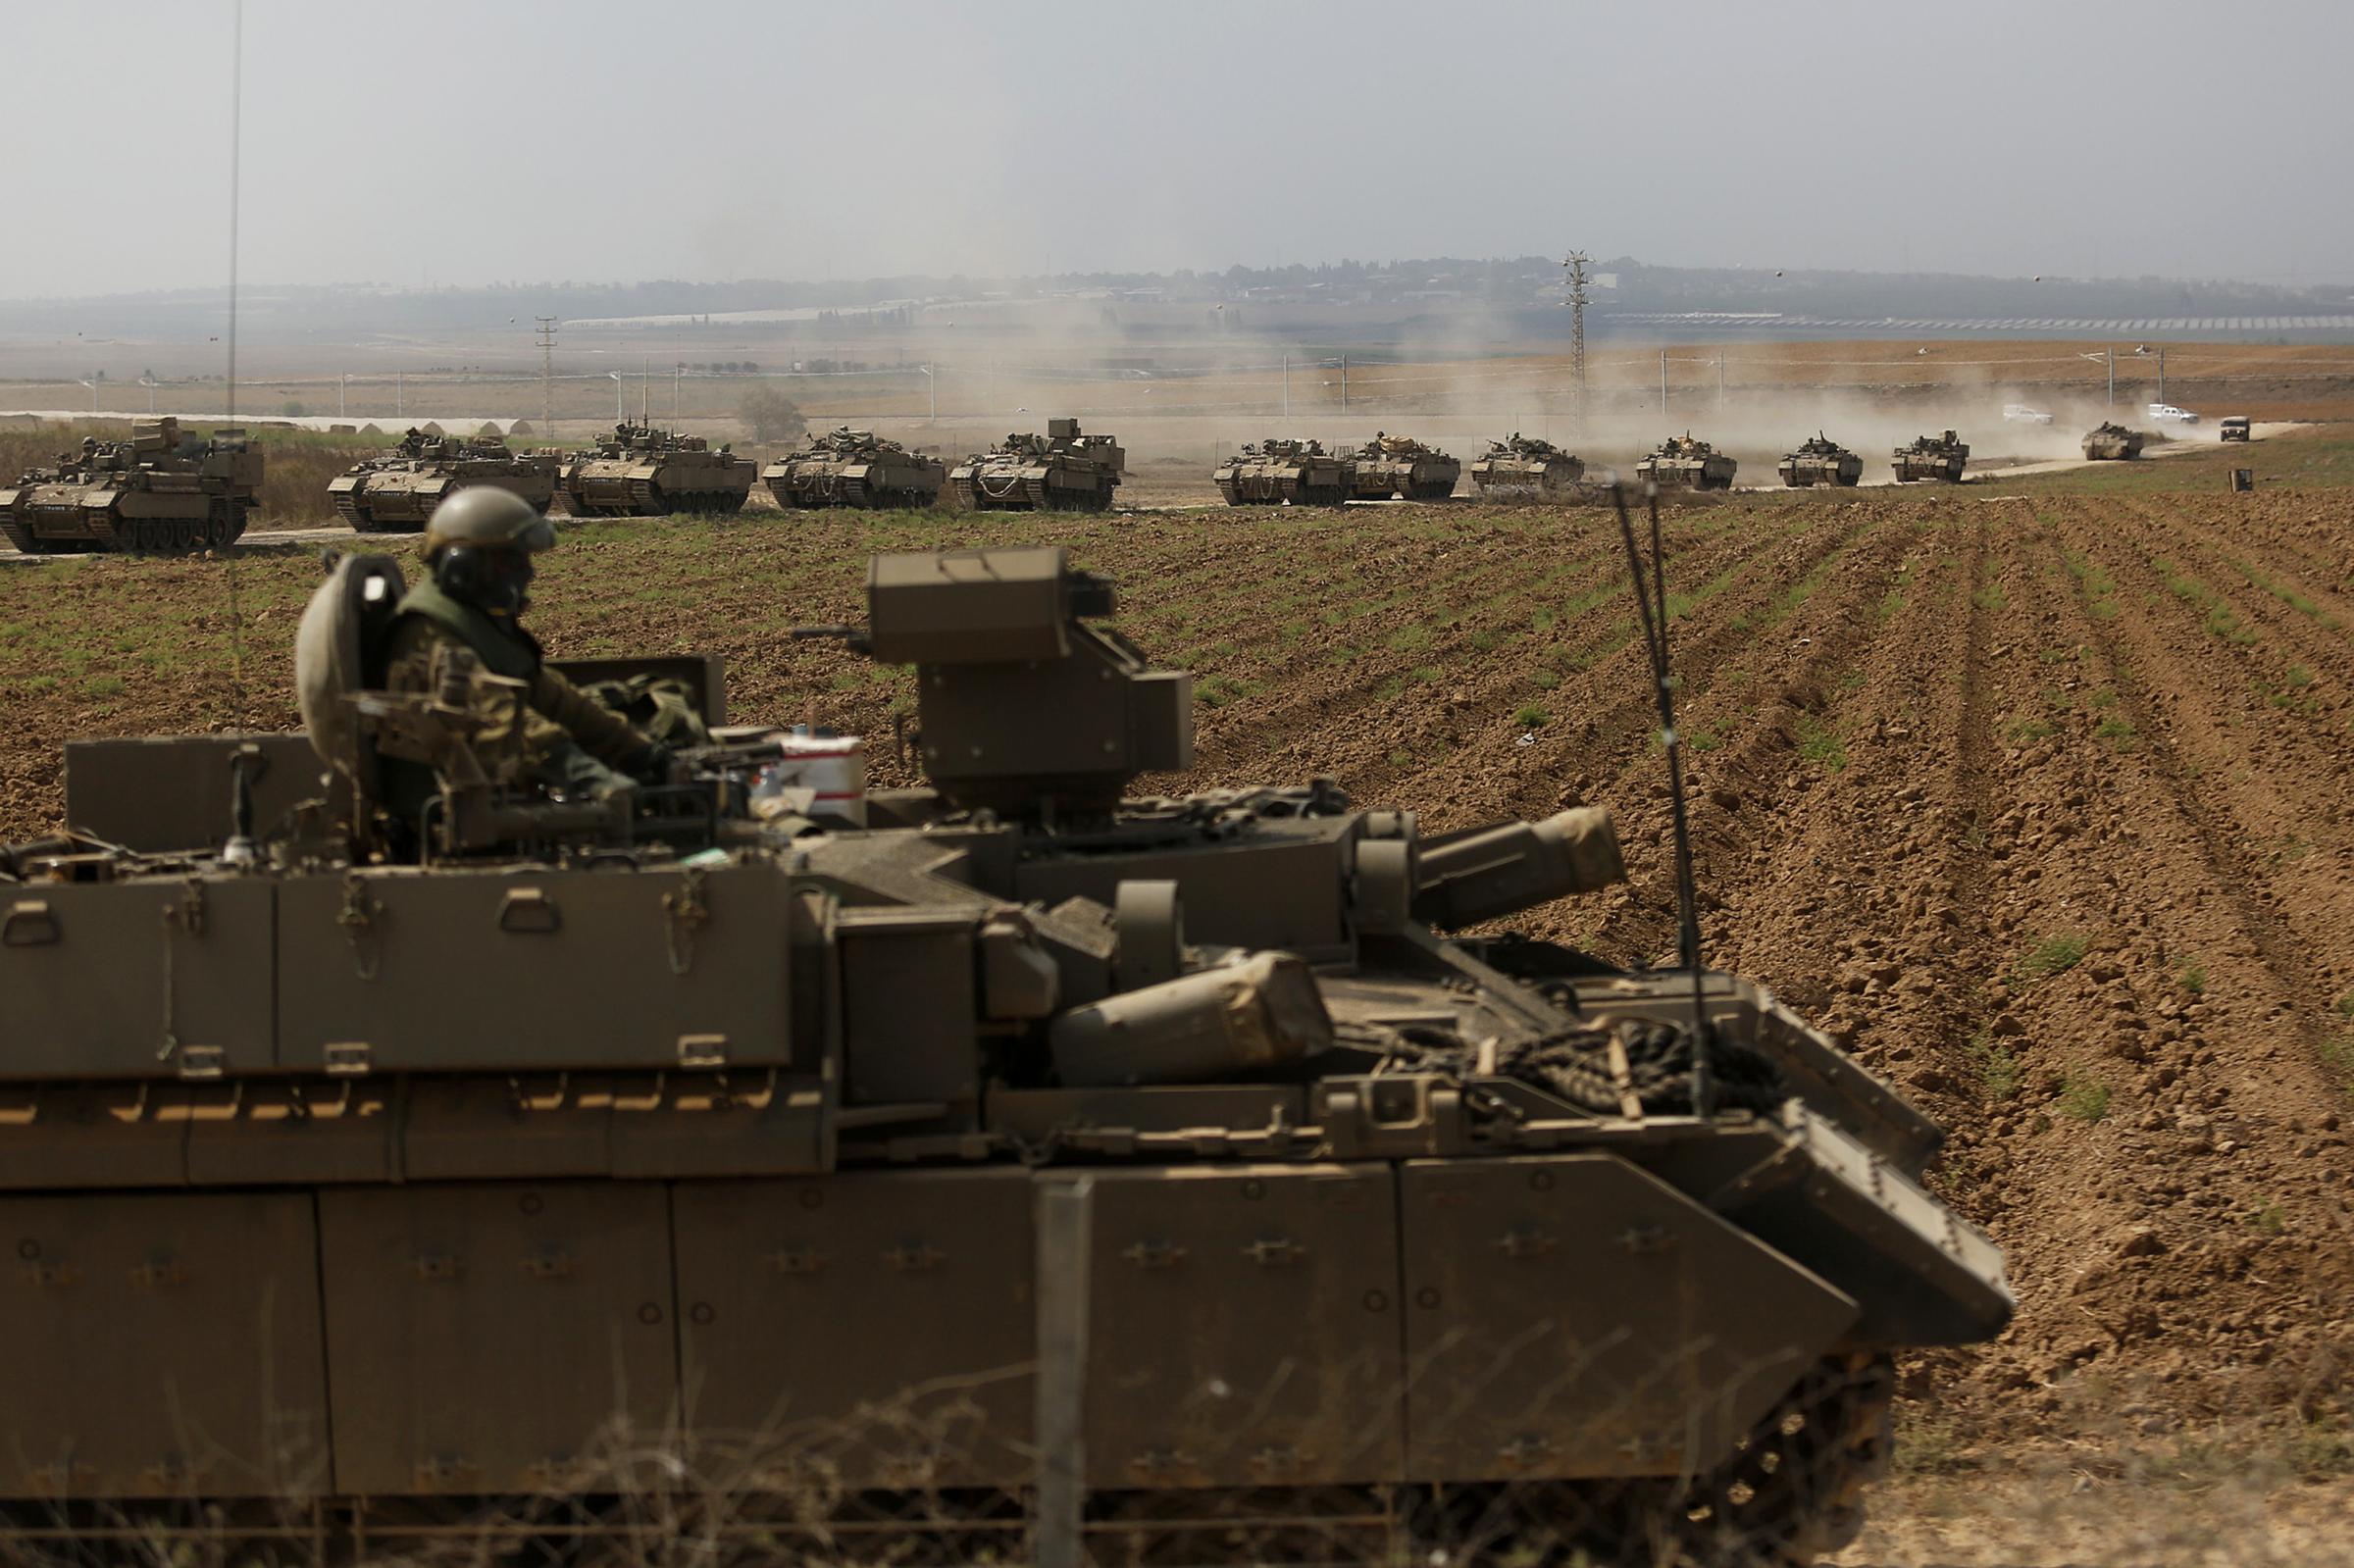 NEAR SDEROT, ISRAEL - OCTOBER 14: Tanks move in formation near the border with Gaza on October 14, 2023 near Sderot, Israel. Israel has sealed off Gaza and launched sustained retaliatory air strikes, which have killed at least 1,400 people with more than